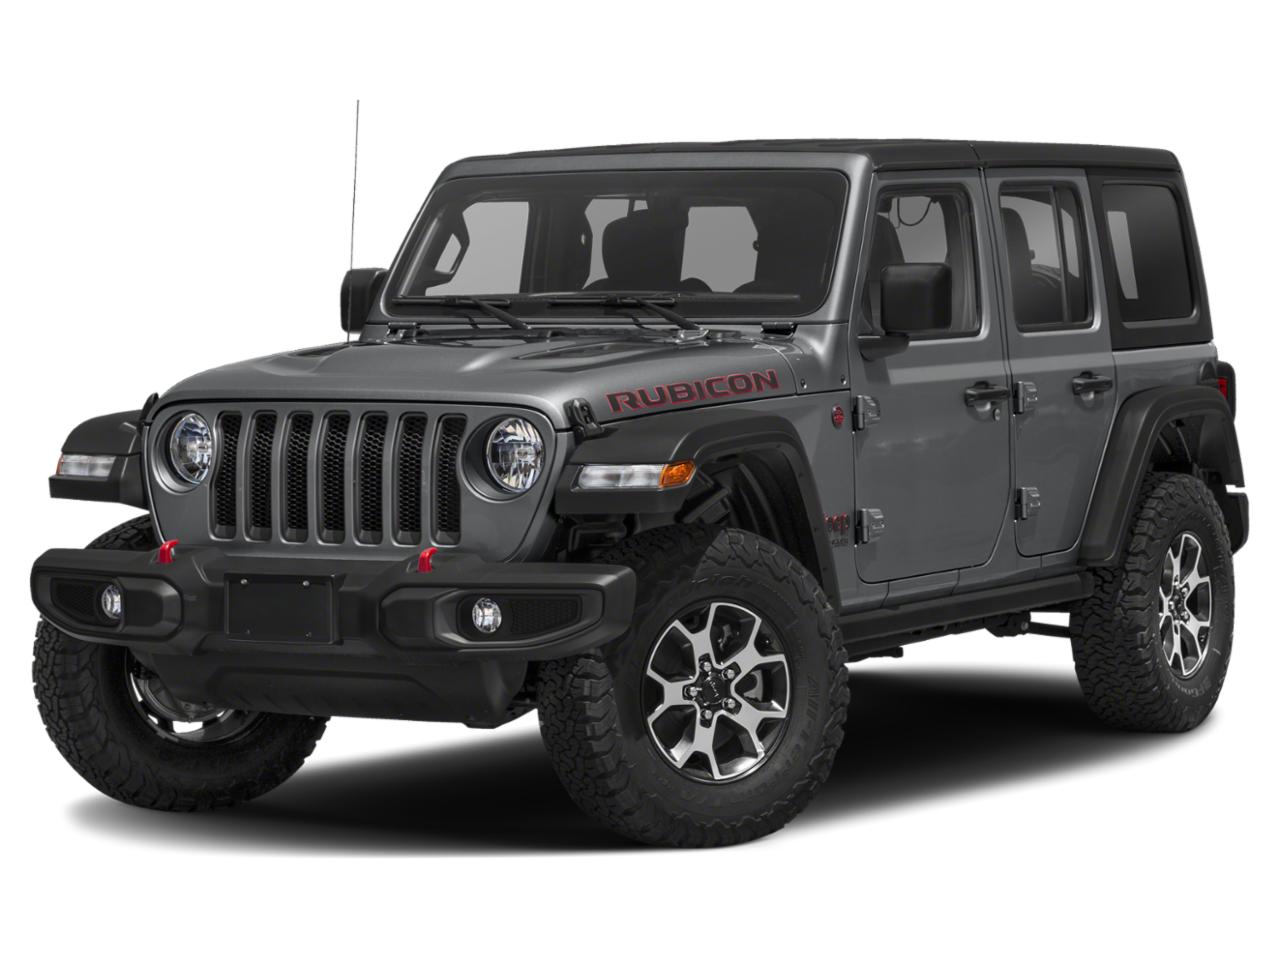 Used 2020 Jeep Wrangler Unlimited Rubicon 4x4 in Silver for sale in  COLEBROOK, New Hampshire - PHY97835